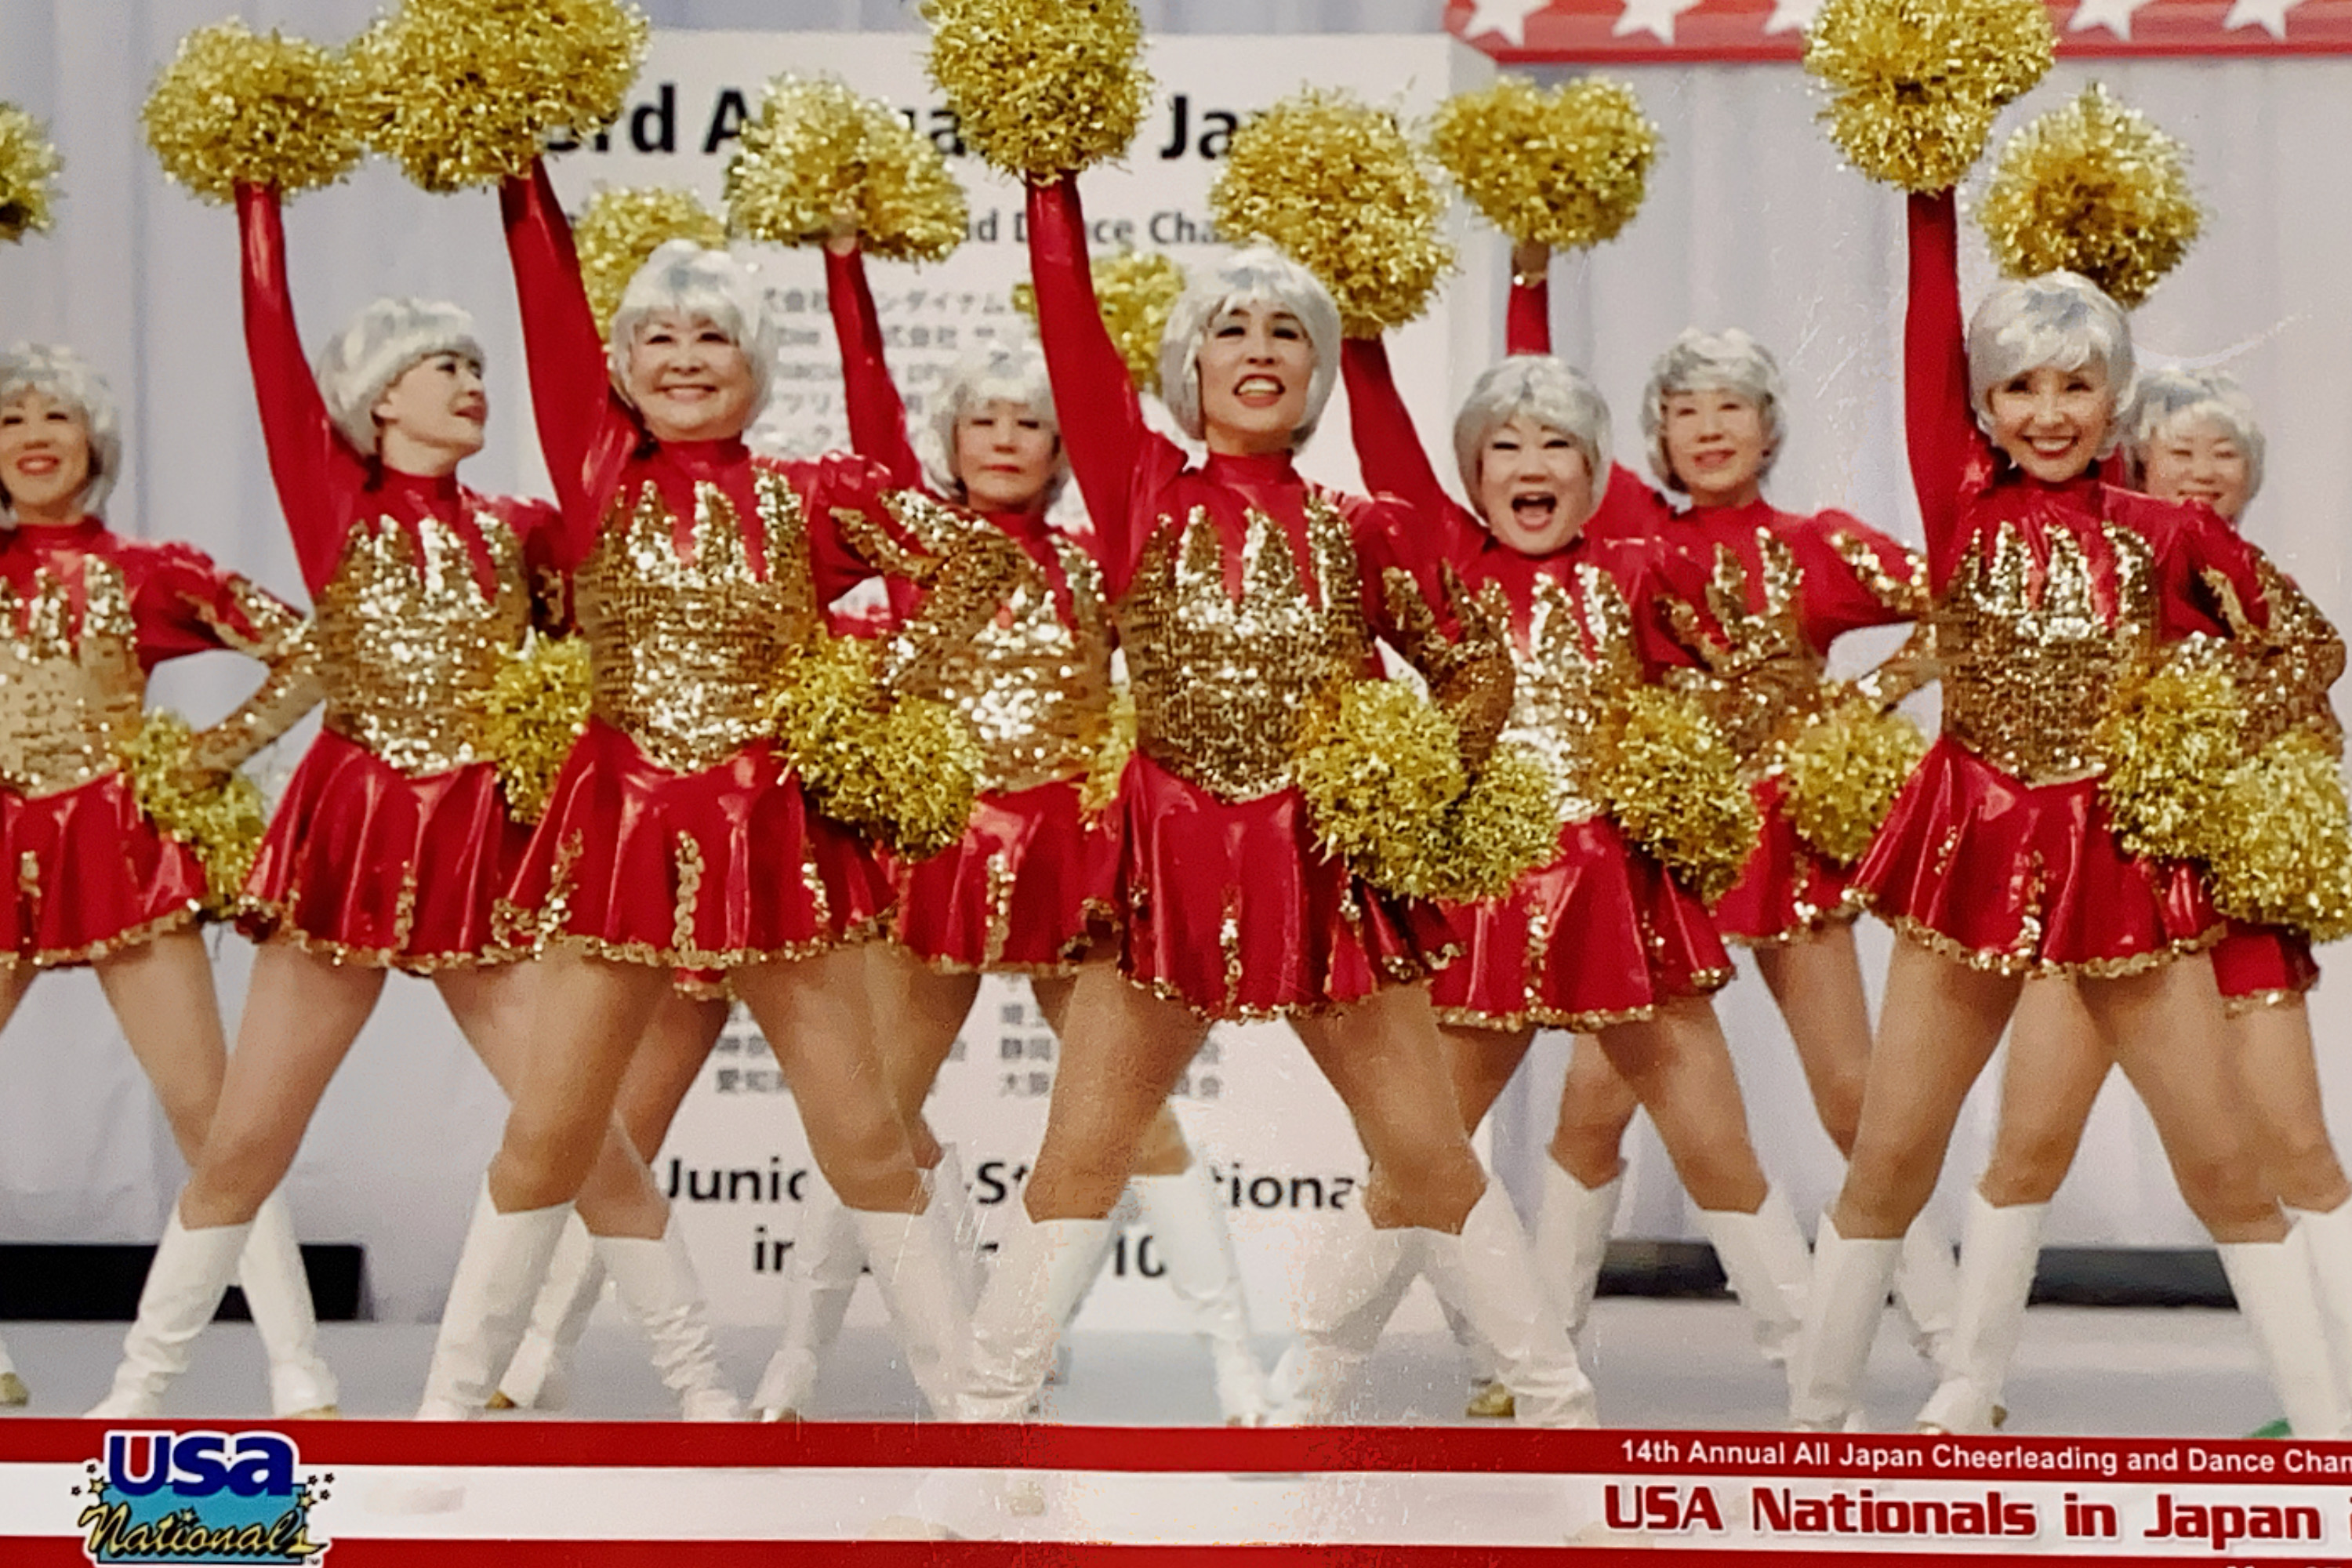 fodspor Bevidst Beskatning Meet Japan Pom Pom: The Cheer Squad Where Members Are in Their 70s